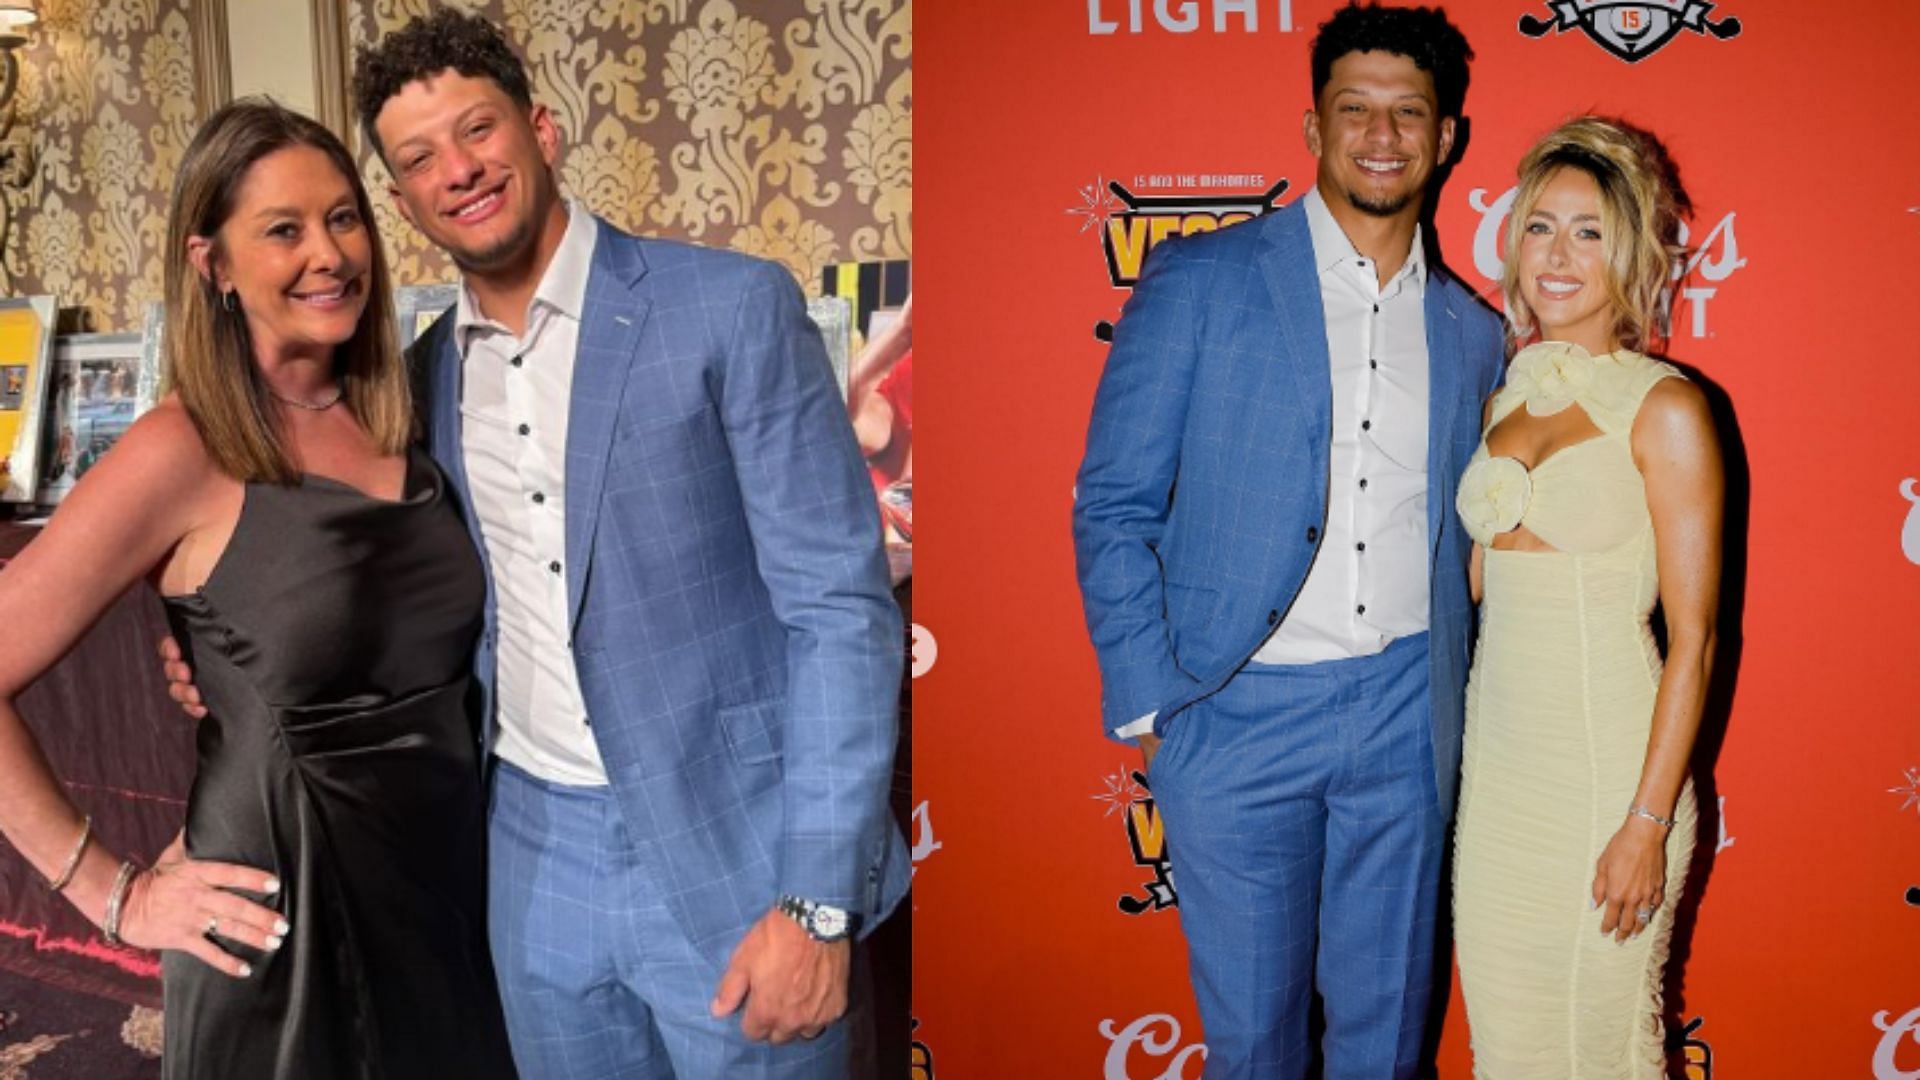 Patrick Mahomes charity event took place this weekend in Las Vegas, Nevada.